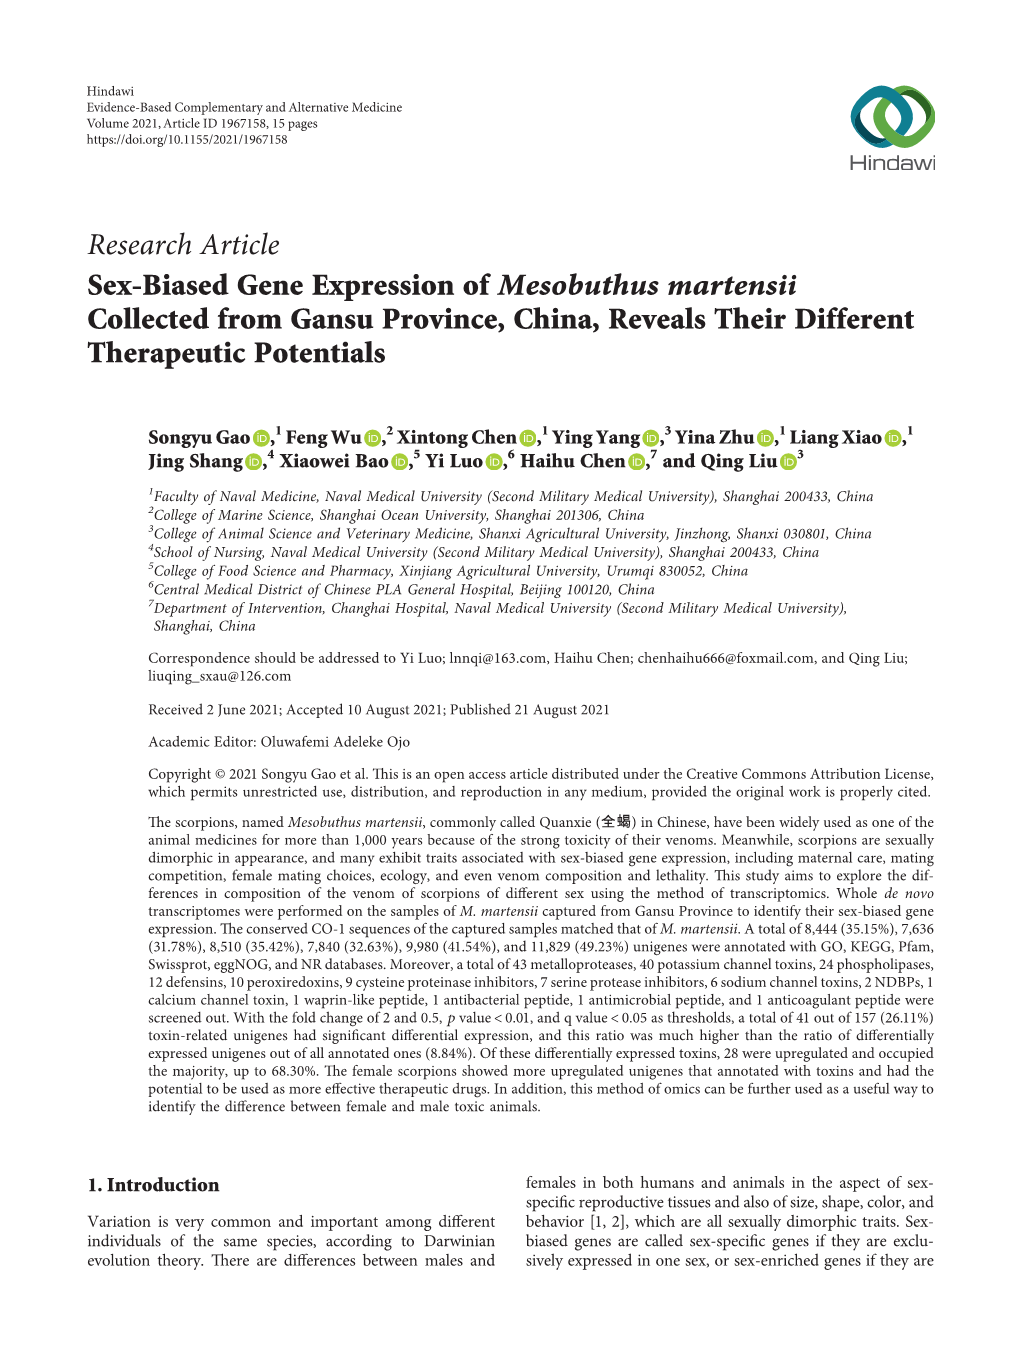 Research Article Sex-Biased Gene Expression of Mesobuthus Martensii Collected from Gansu Province, China, Reveals Their Different Therapeutic Potentials